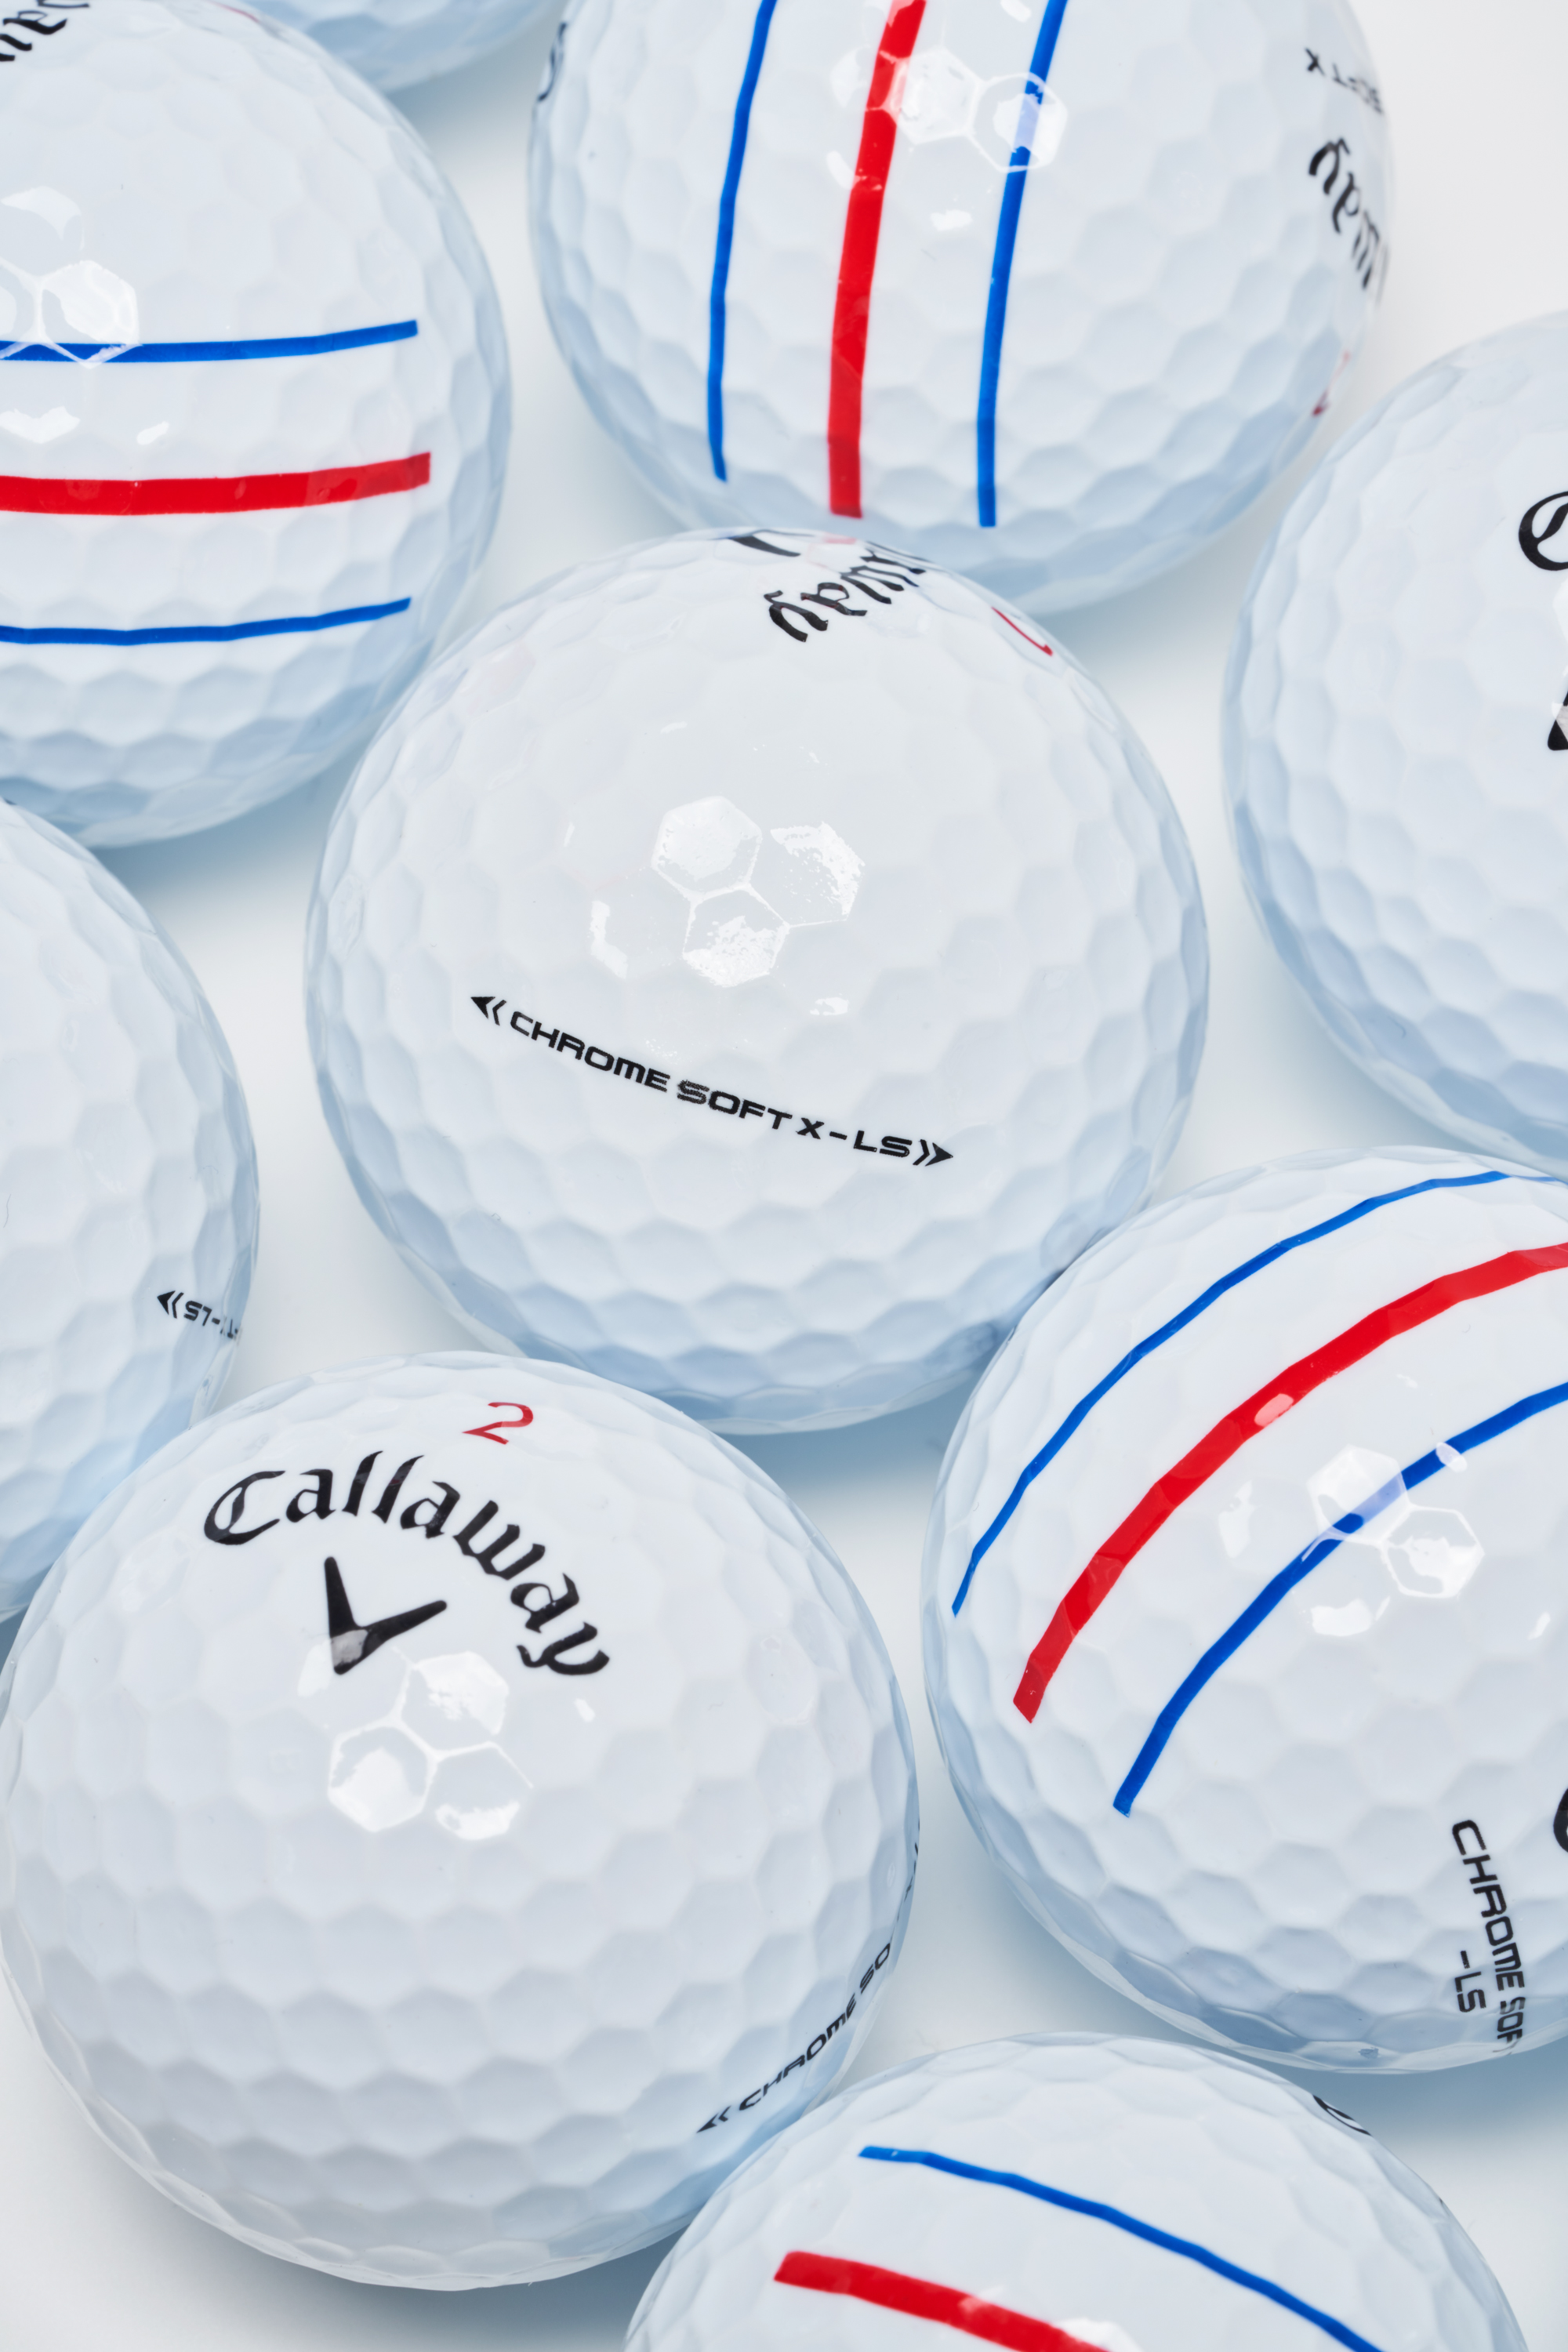 Callaway adds low-spin Chrome Soft X LS to lineup, but it's not